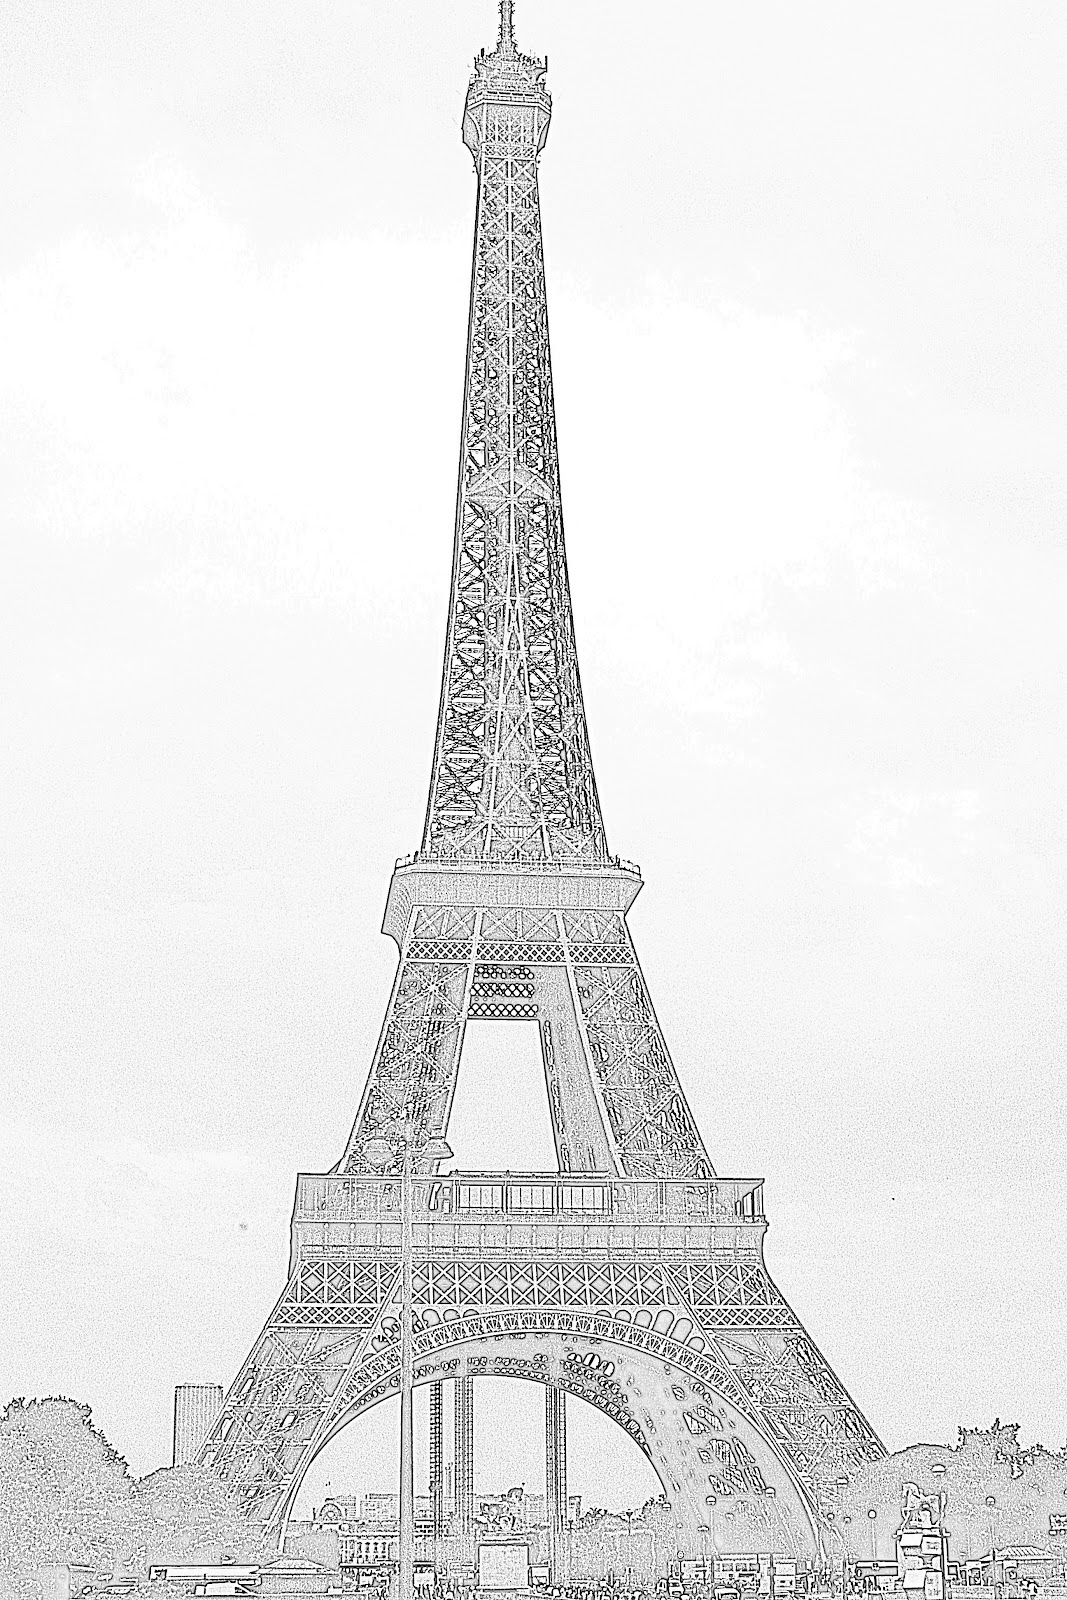 Eiffel Tower Pencil Sketch at Explore collection